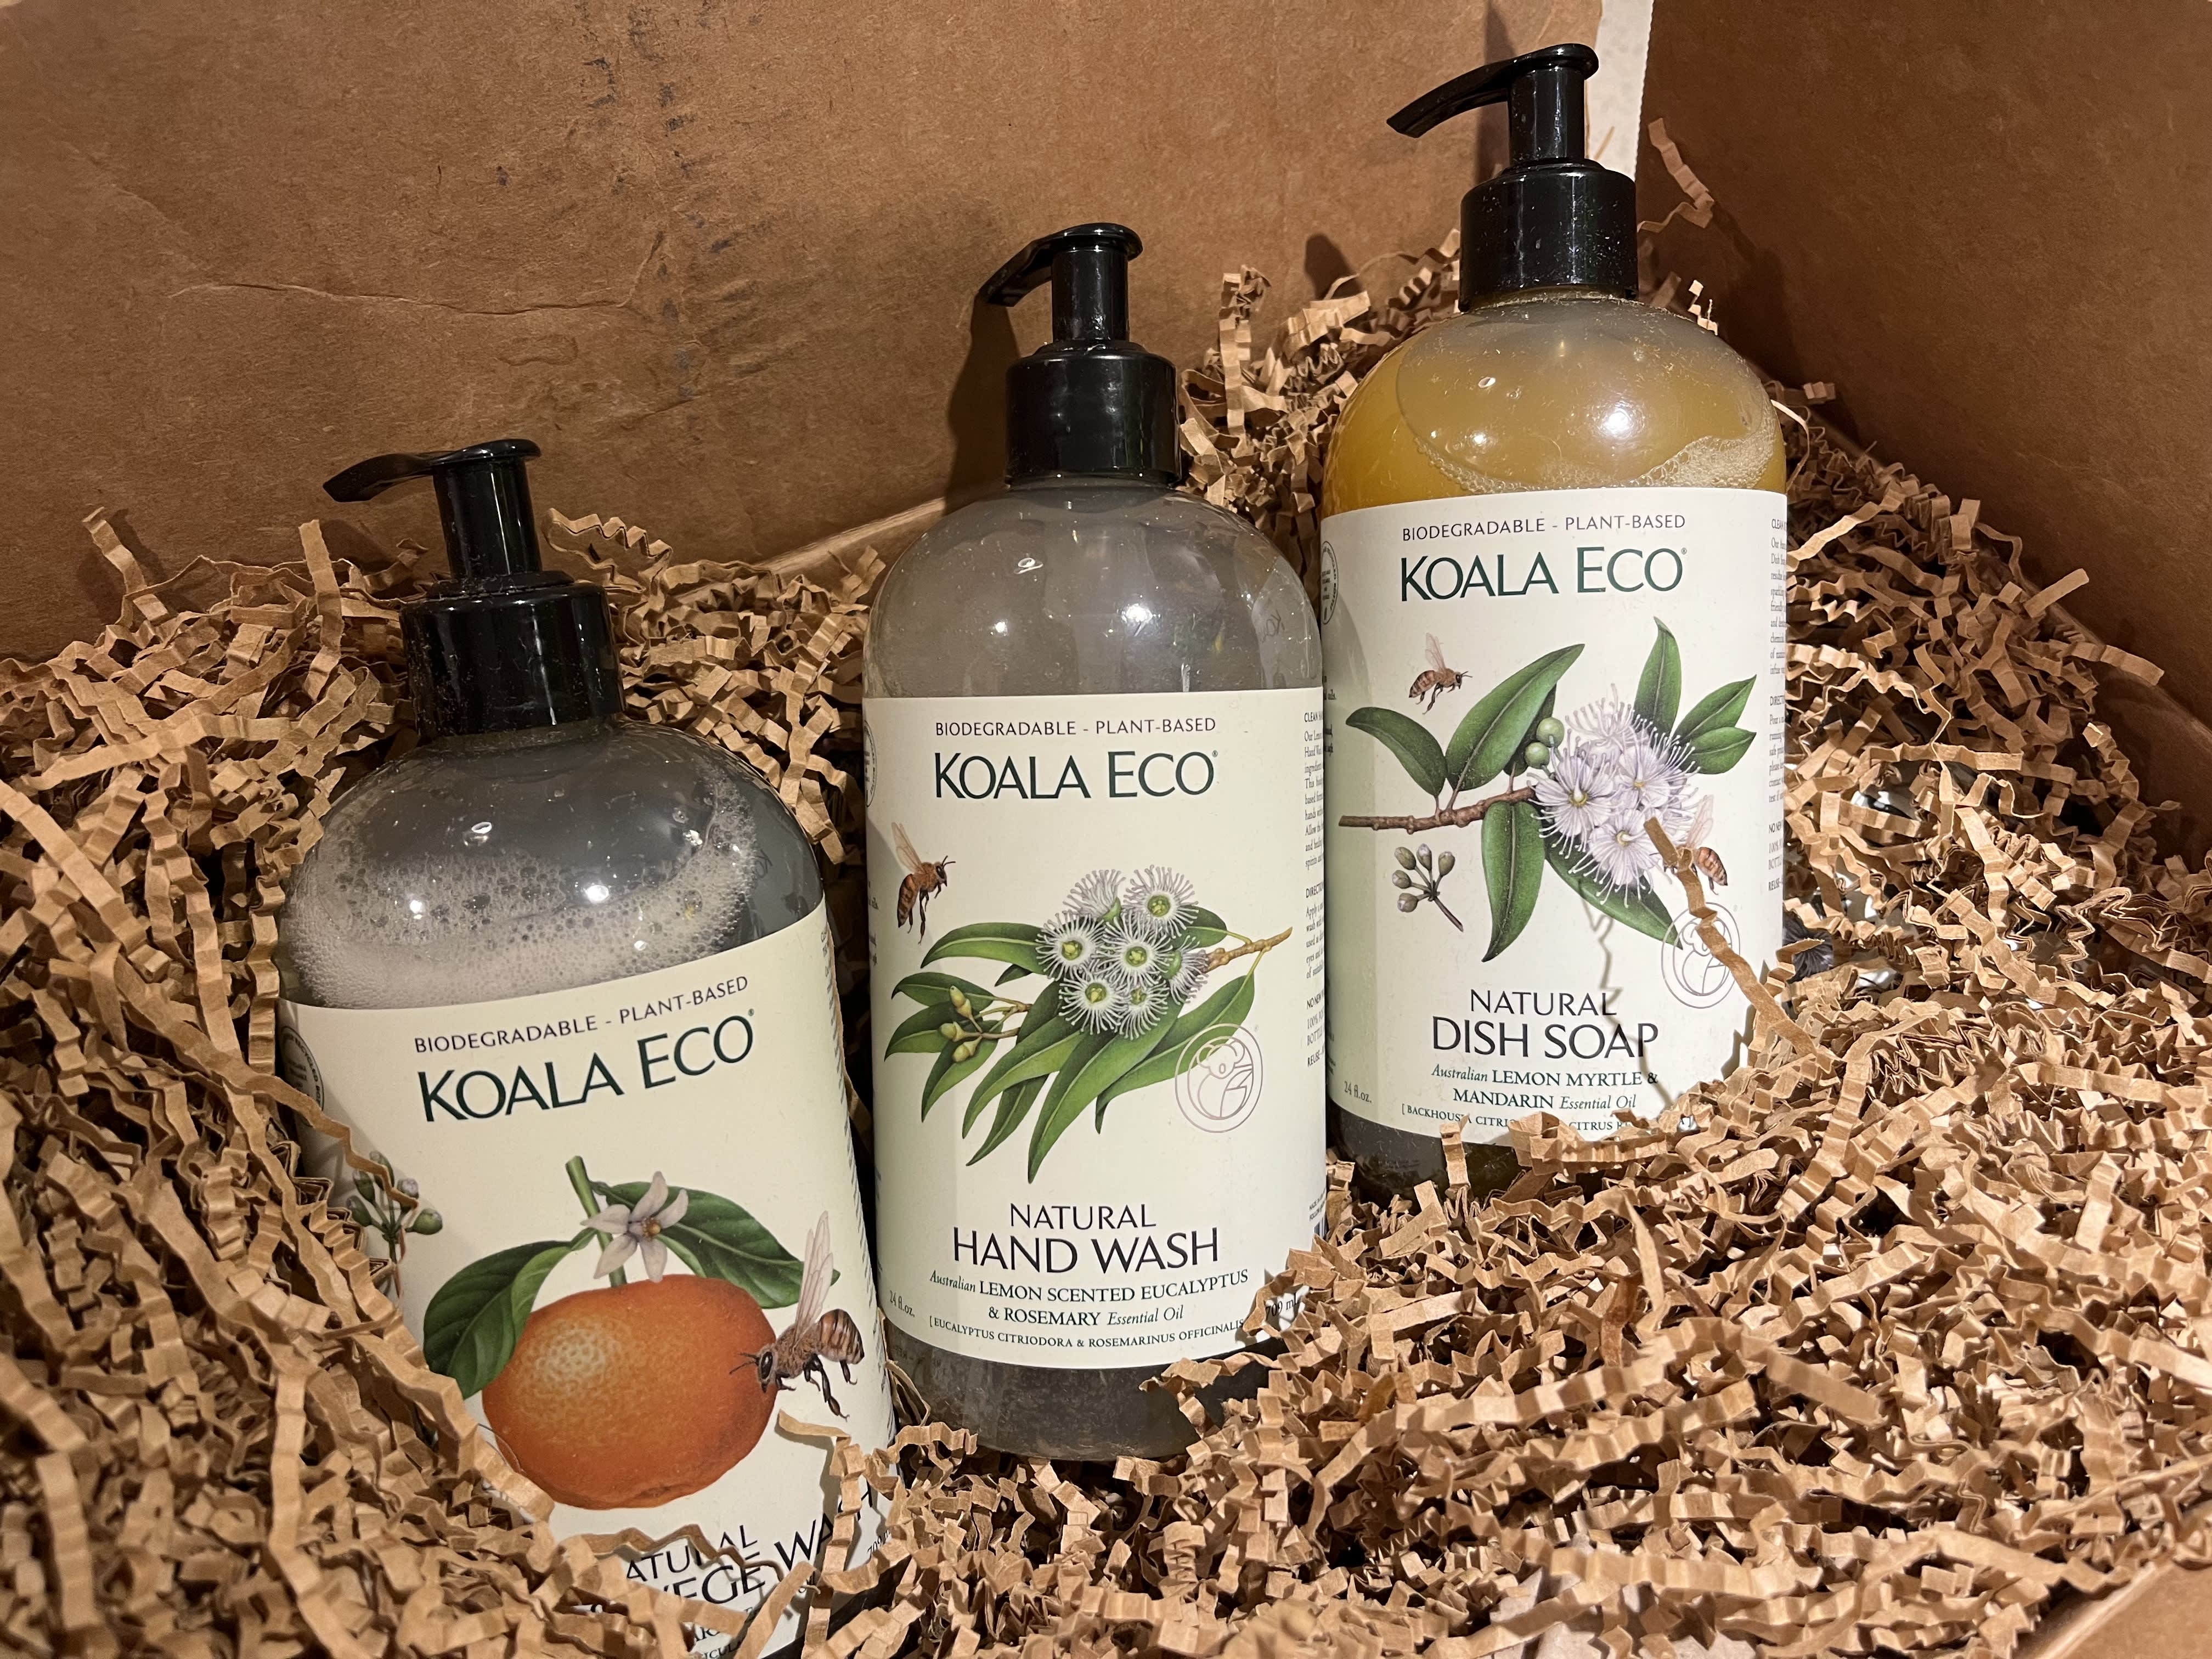 KOALA ECO cleaning review and promo code